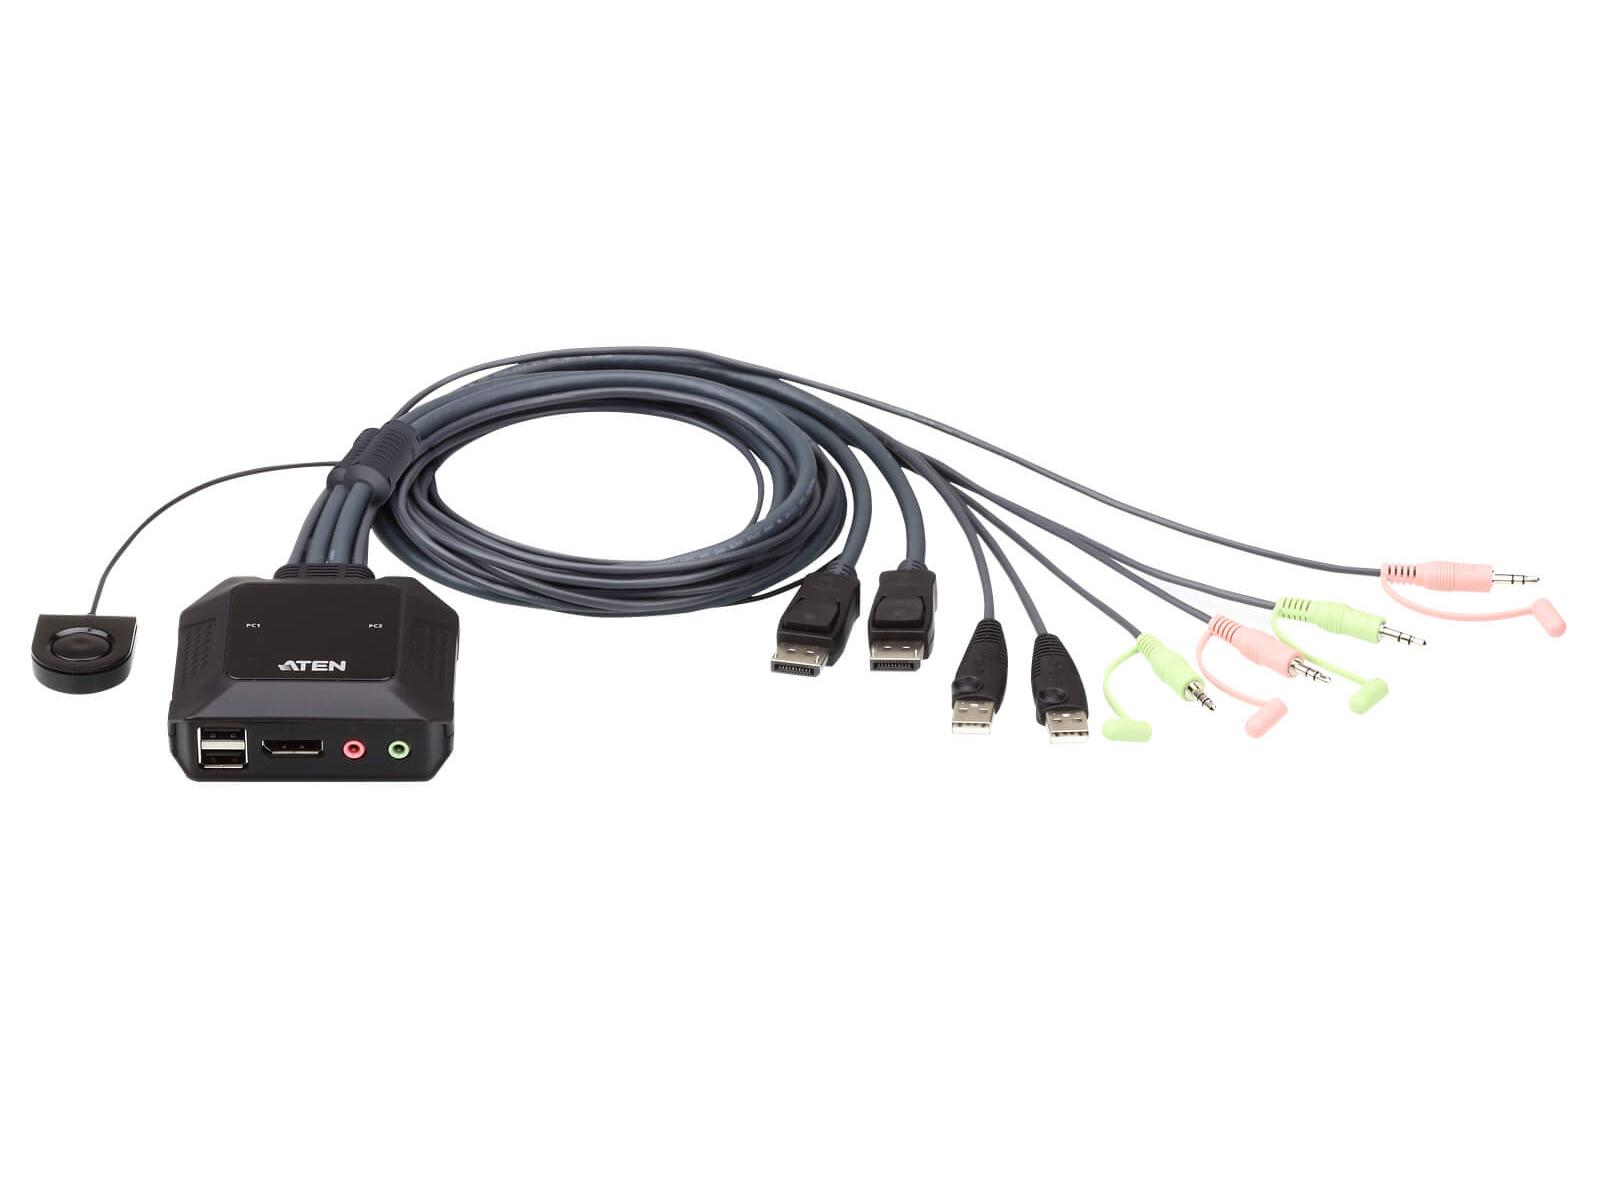 CS22DP 2-Port USB DisplayPort Cable KVM Switch with Remote Port Selector by Aten